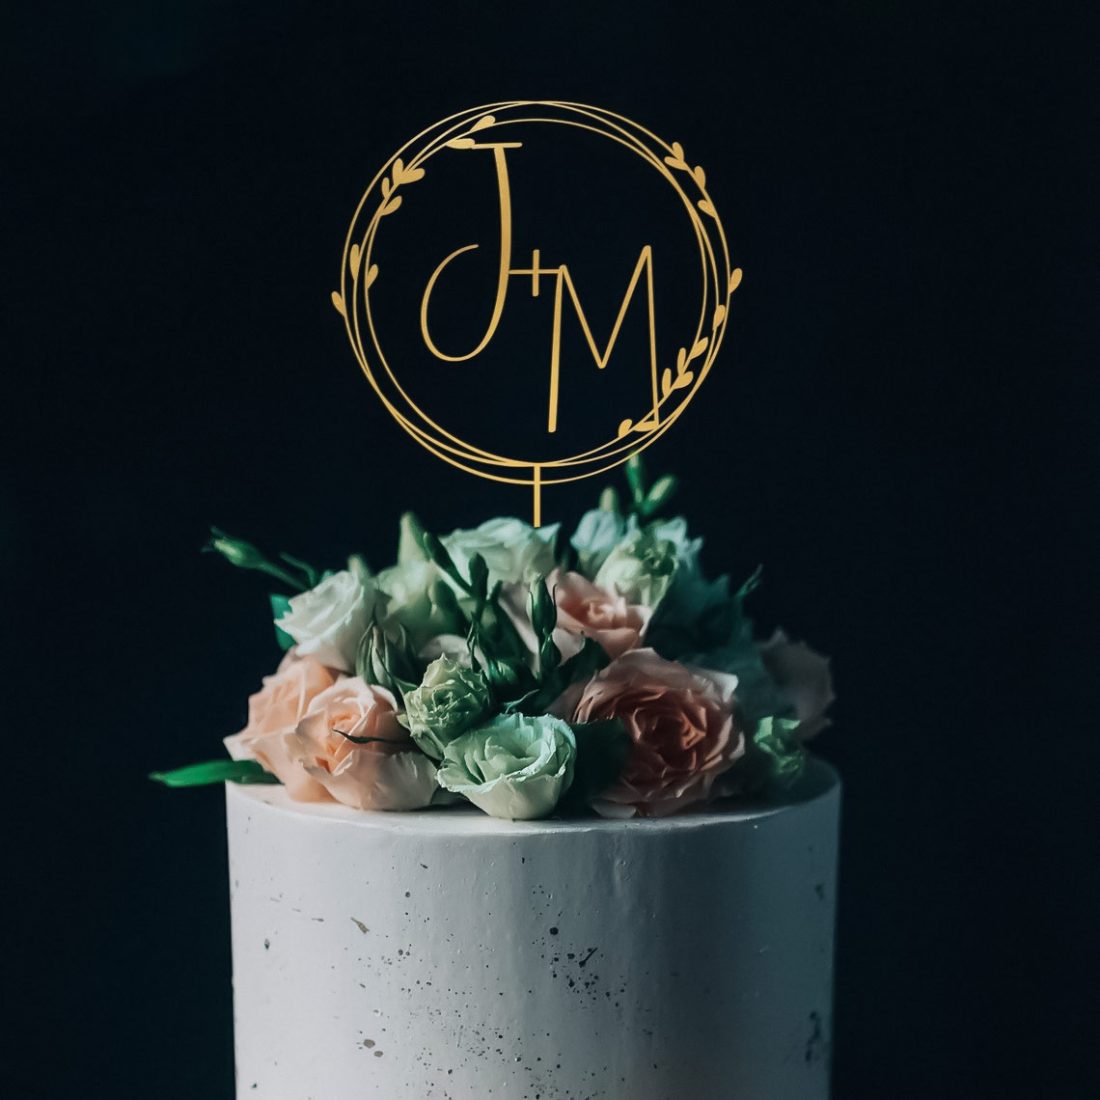 Use your wedding monogram as a cake topper